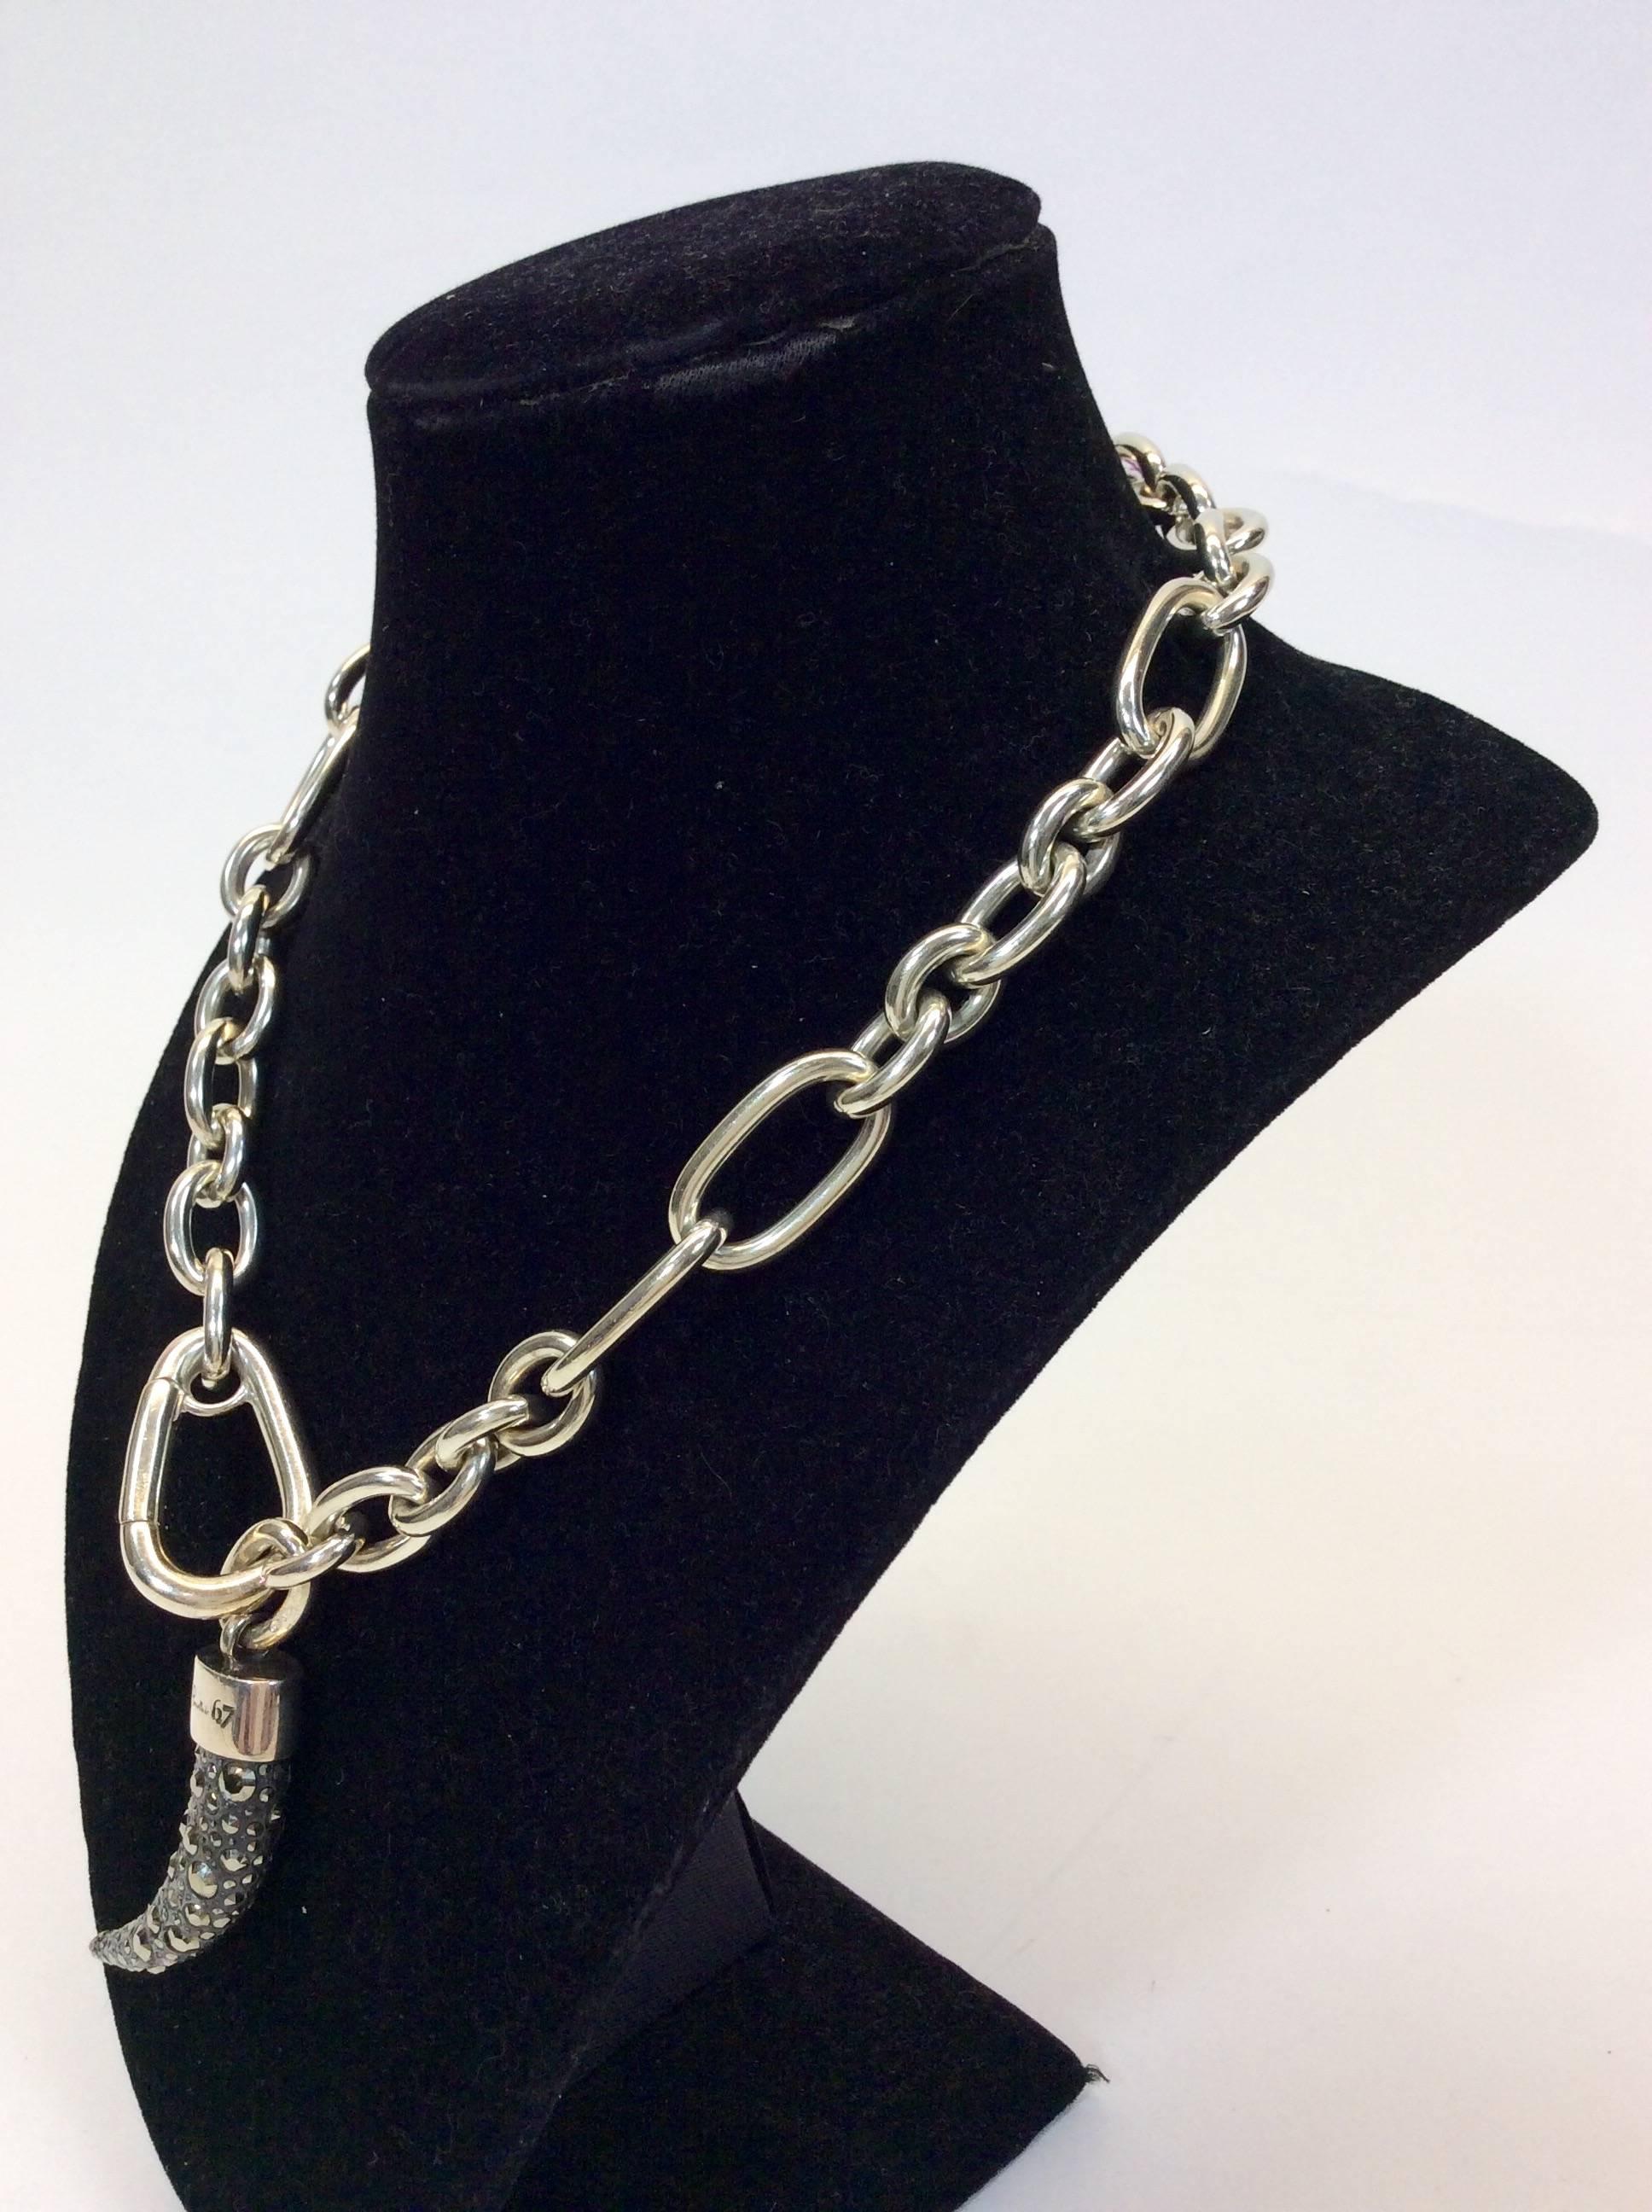 Retailed at $3,190.00 
Sterling Silver
Adjustable Chain Necklace with an Oversized Clasp 
Horn Charm Embellished with Marcasite 
Raw material used: Pyrite
Length Approximately 45 CM